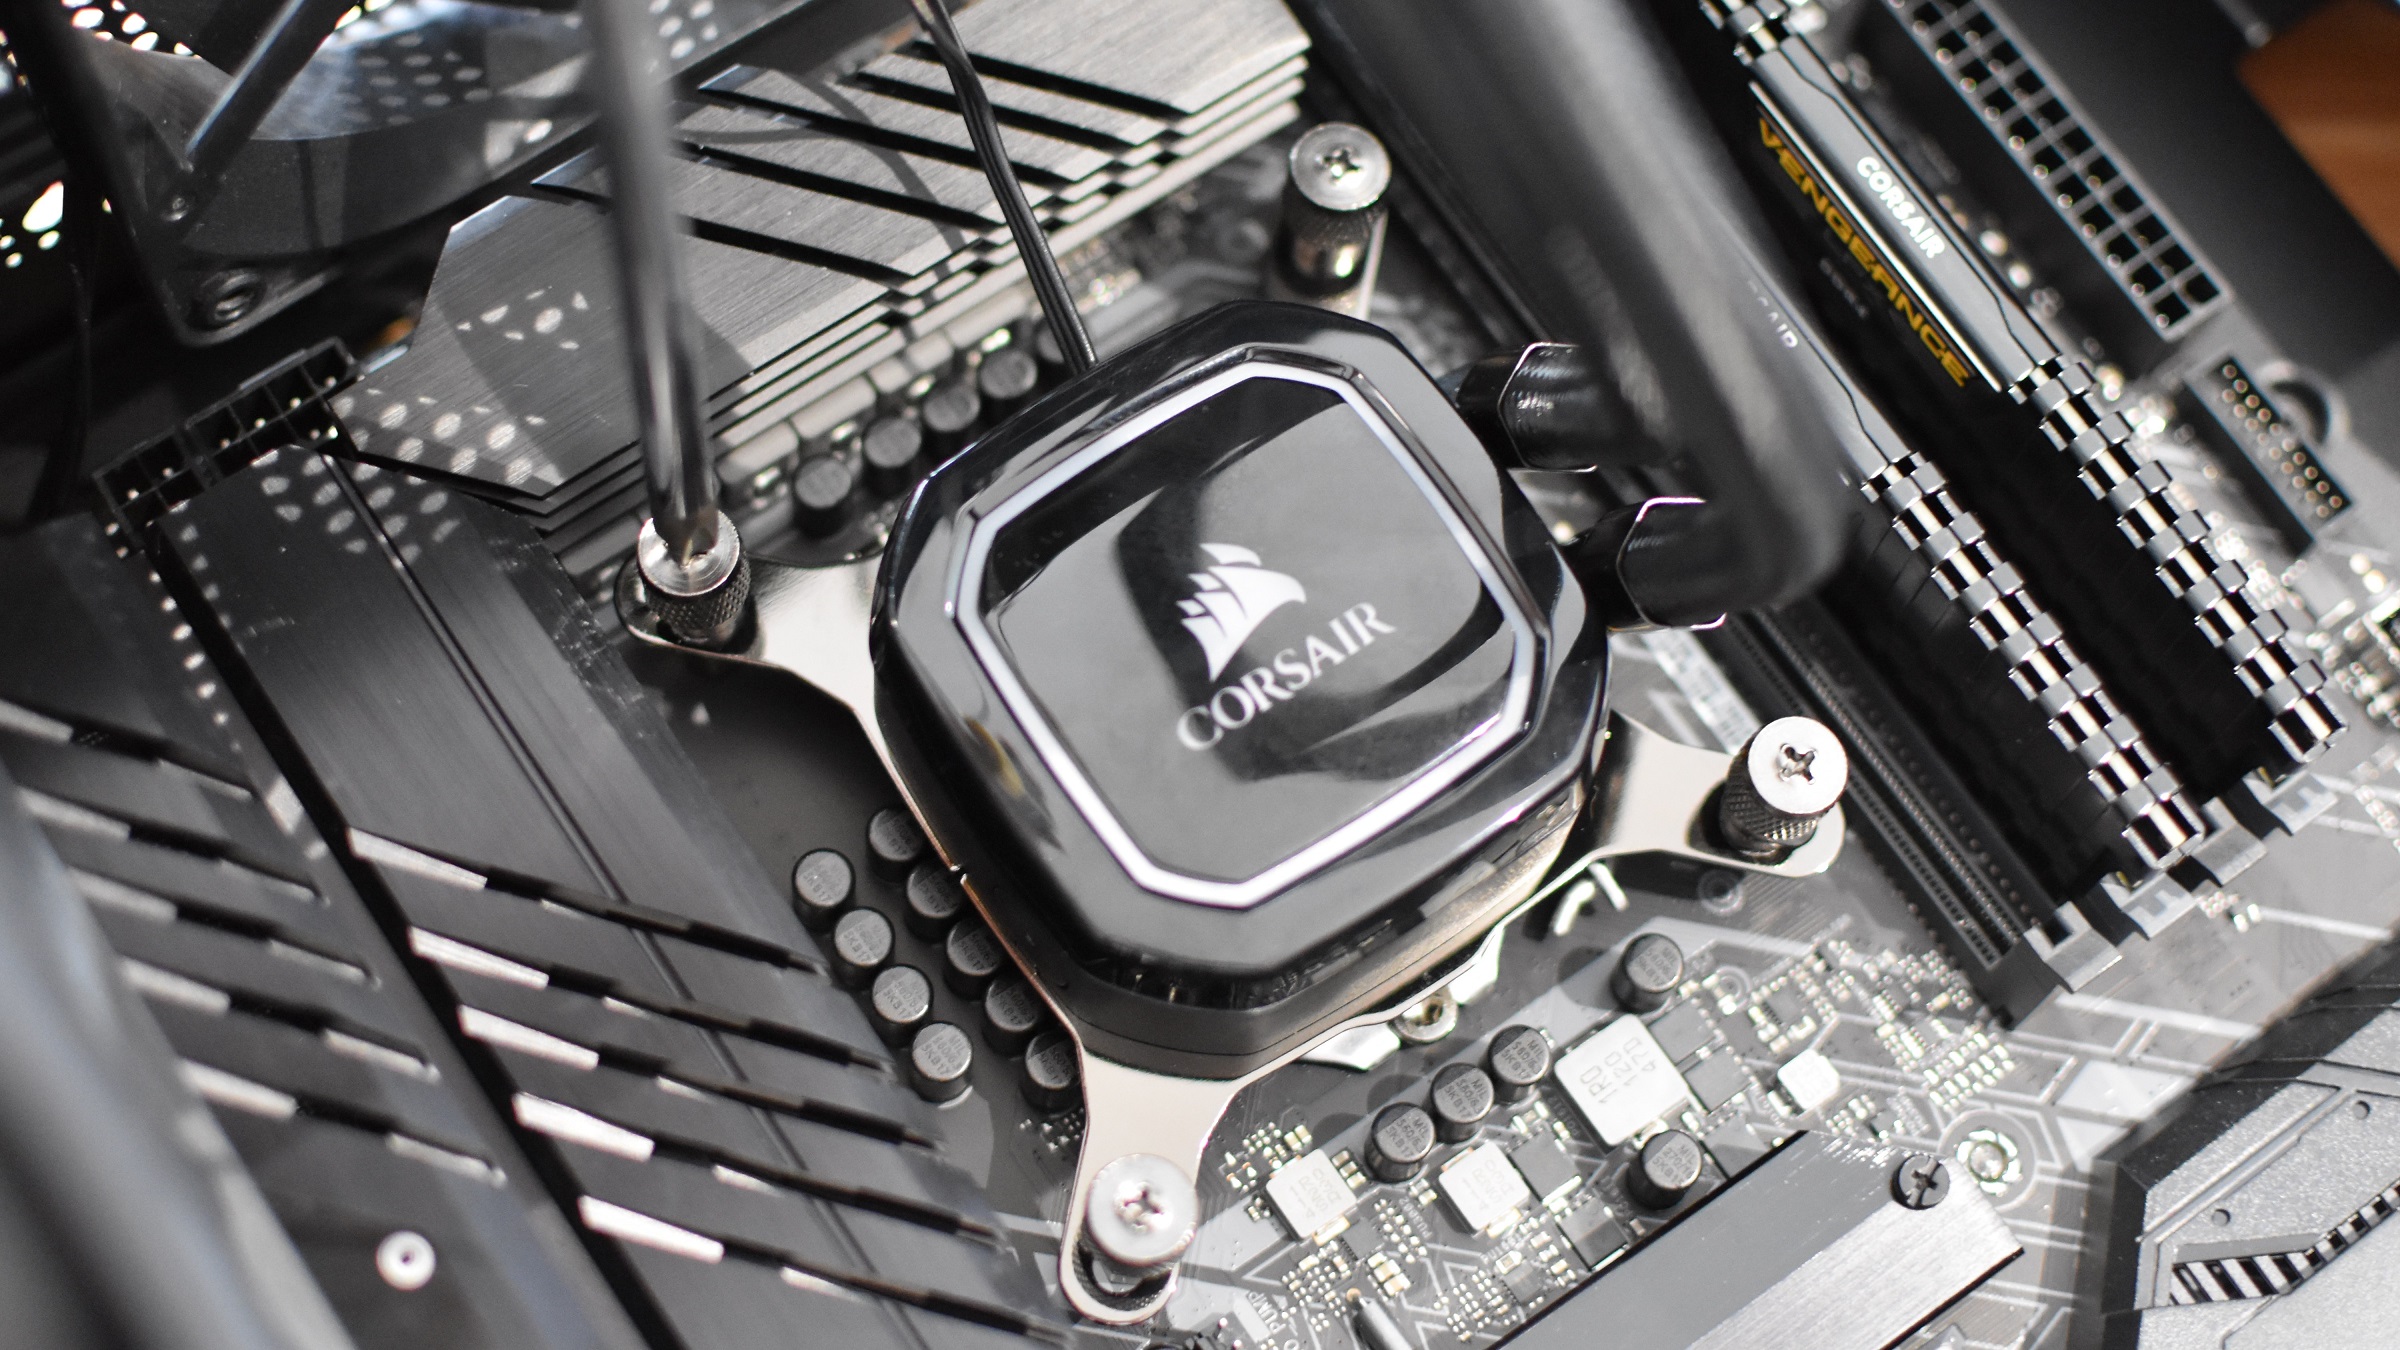 The pump of a Corsair AIO watercooler being installed on a motherboard.